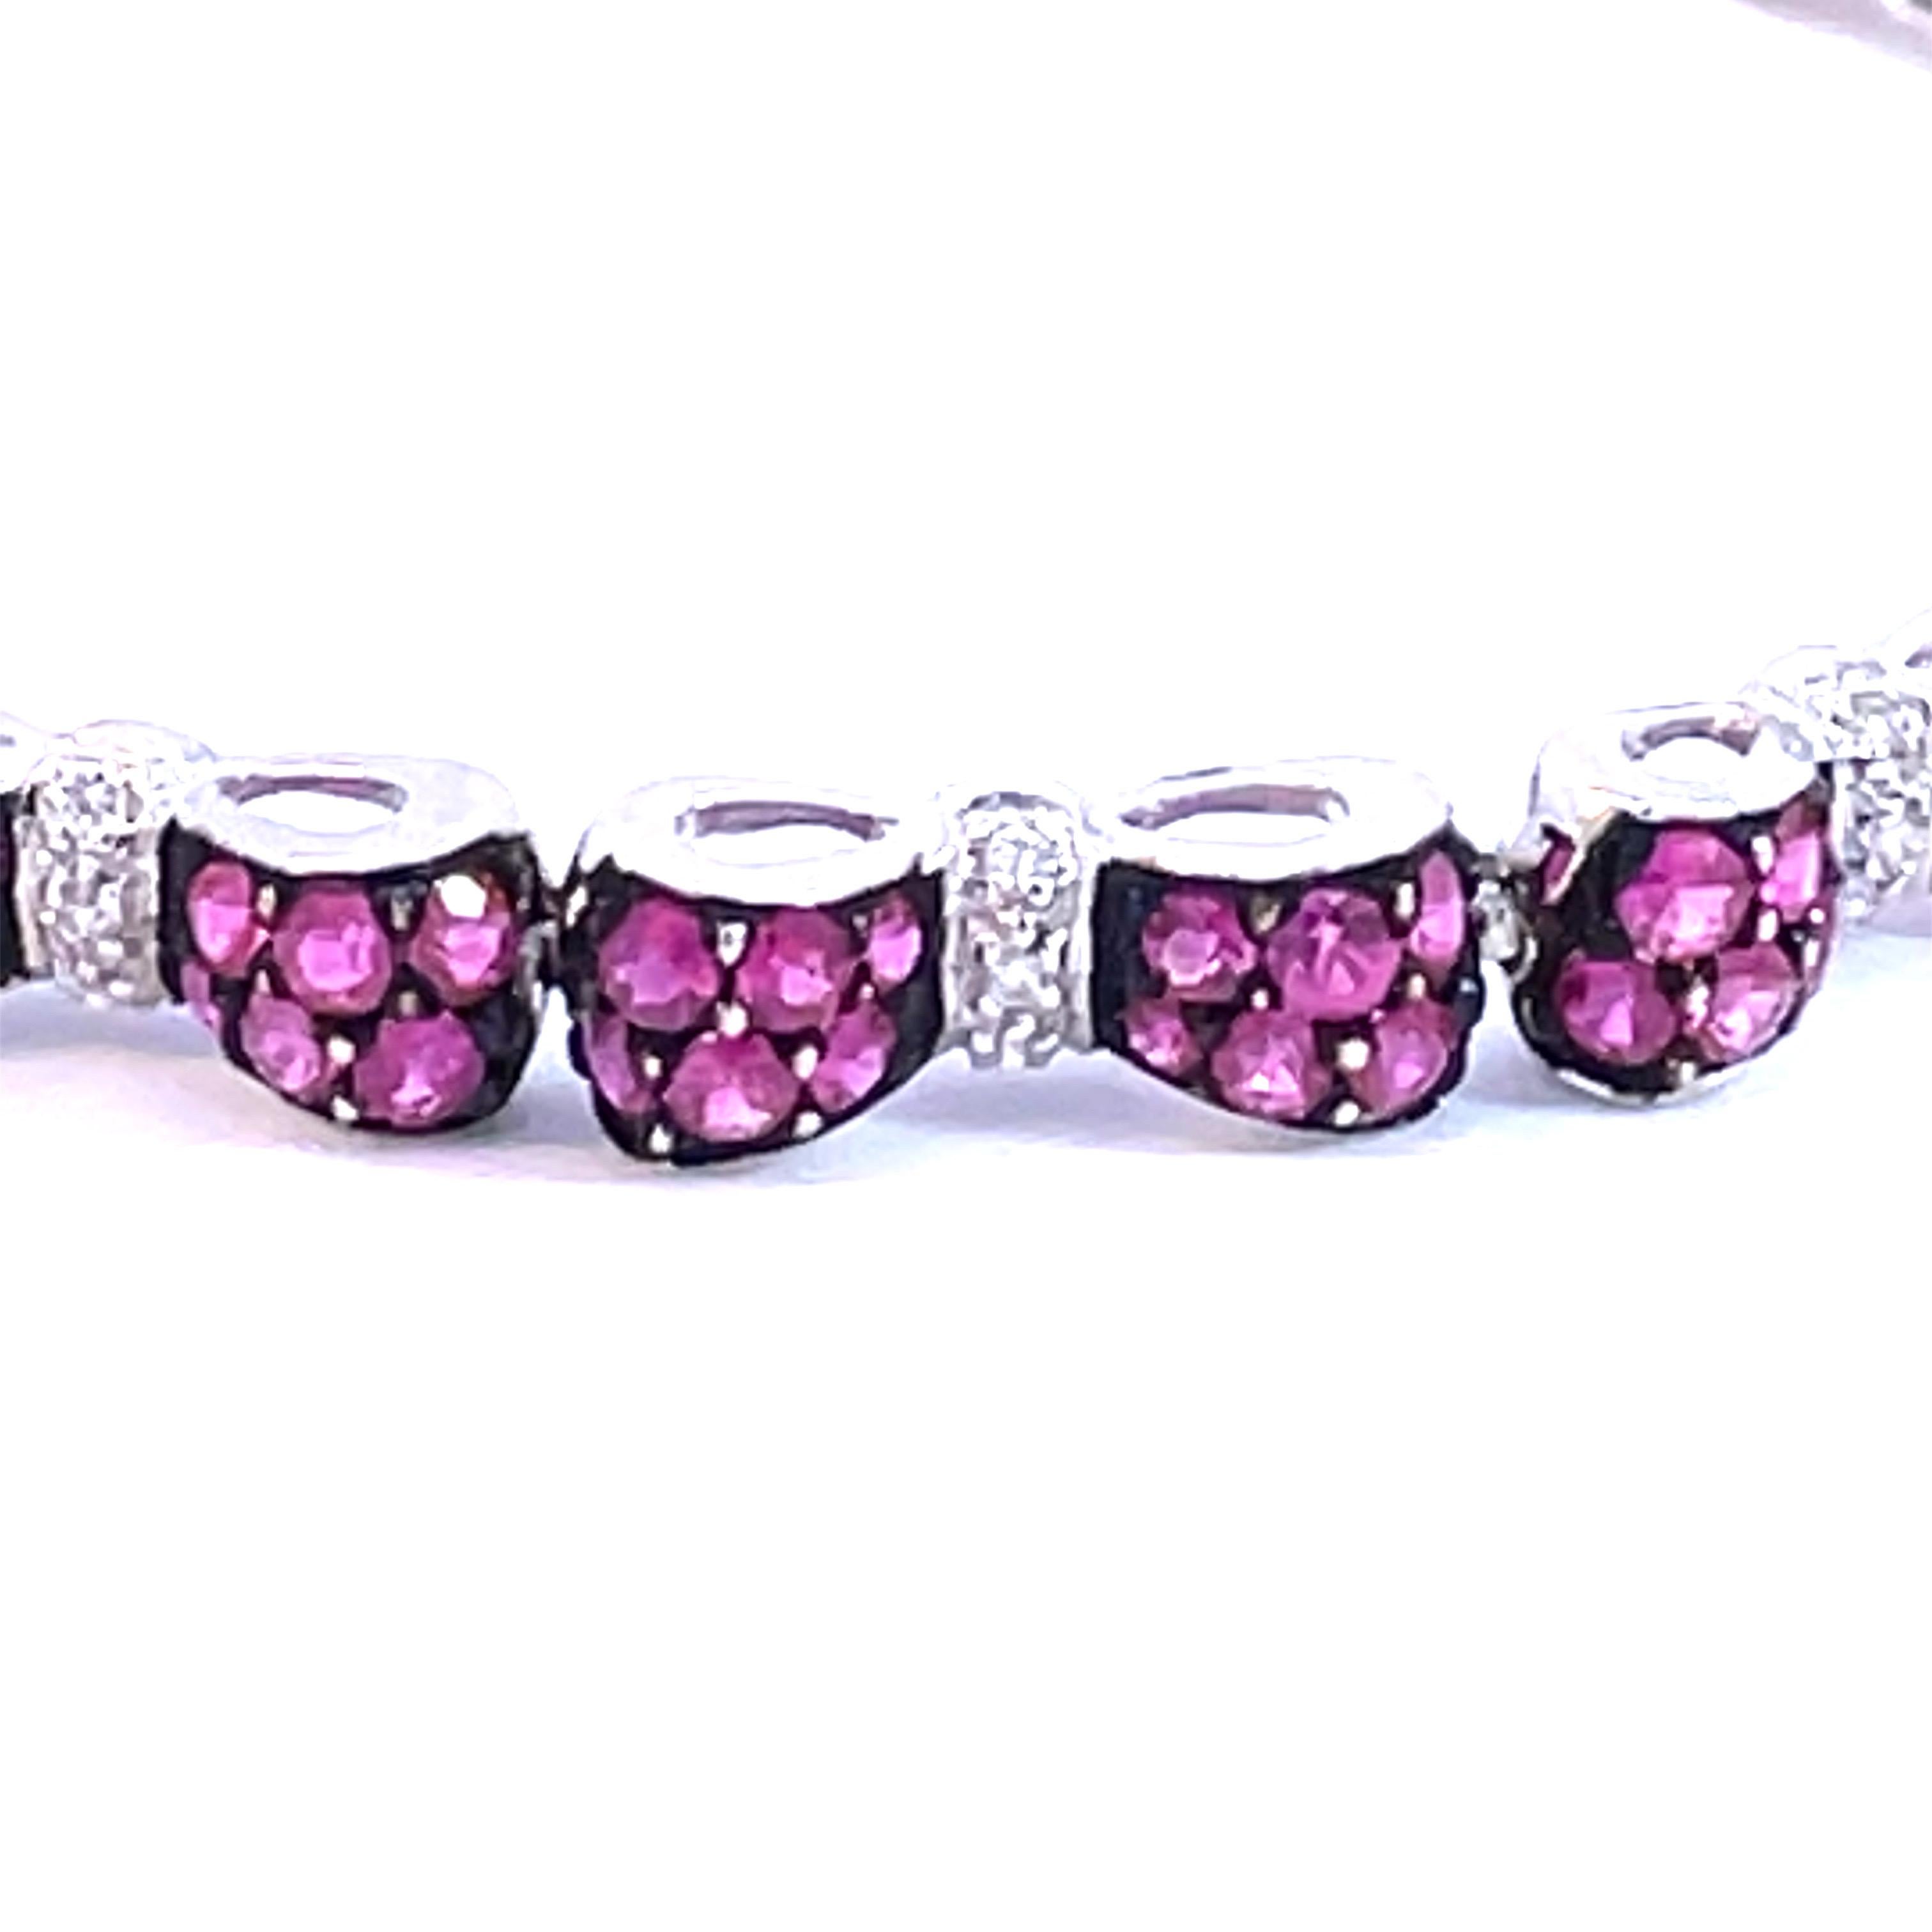 An Beautiful Bow Tie Bracelet set with natural pink sapphires and natural white diamonds with a black rhodium finish around the deep pink sapphires in 18kt white gold. 

144 natural deep pink sapphires weighing 6.00ct total weight

36 natural white